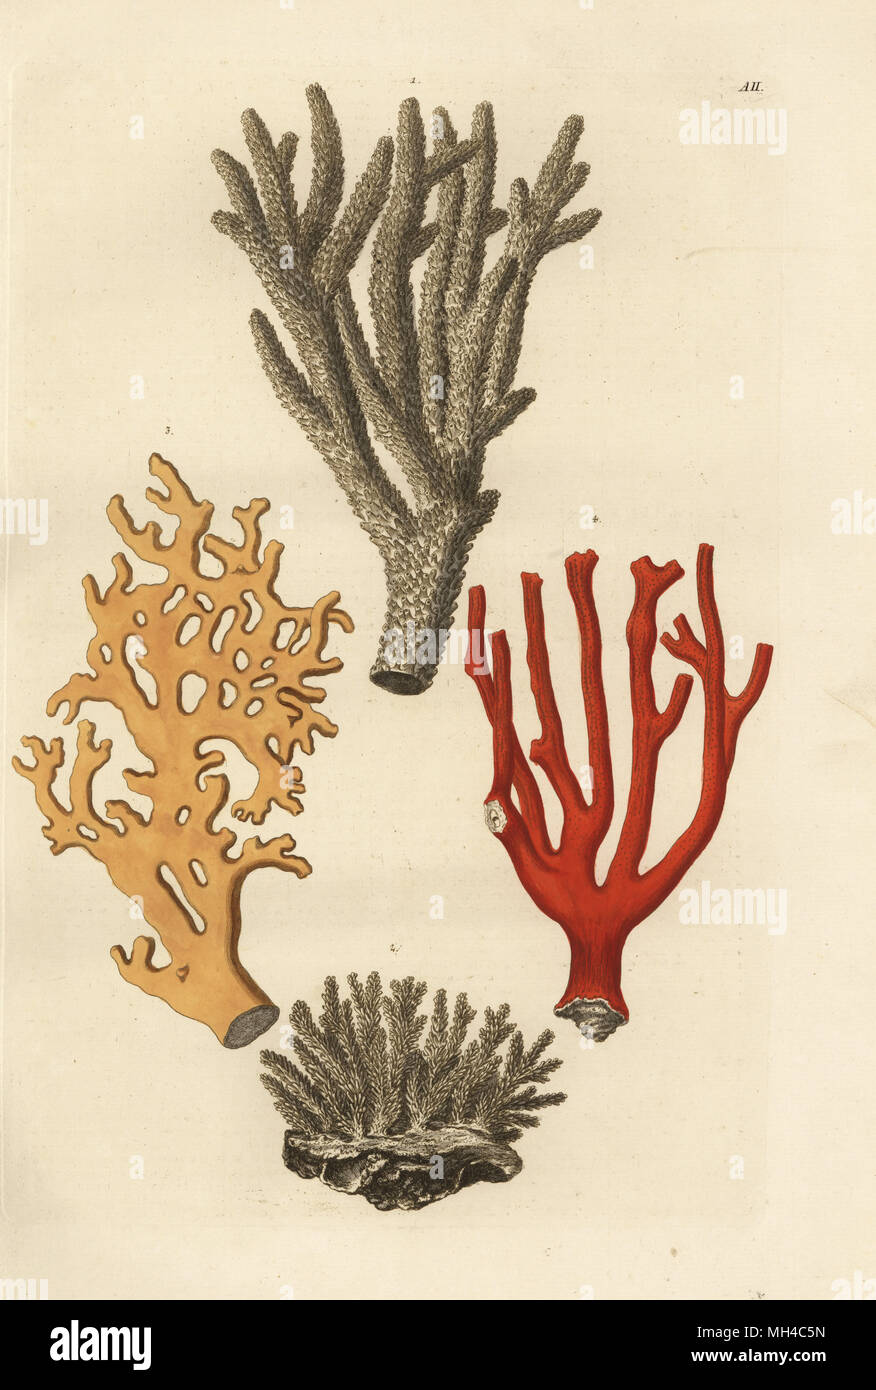 Coral species: Acropora abrotanoides 1, white coral 2, sea ginger, Millepora alcicornis 3, and red coral. (Madrepora abrotanoides, Corallium porofum album, Millepora digitata, Litophyton aureum). Handcoloured copperplate engraving from Georg Wolfgang Knorr's Deliciae Naturae Selectae of Kabinet van Zeldzaamheden der Natuur, Blusse and Son, Nuremberg, 1771. Specimens from a Wunderkammer or Cabinet of Curiosities. Stock Photo